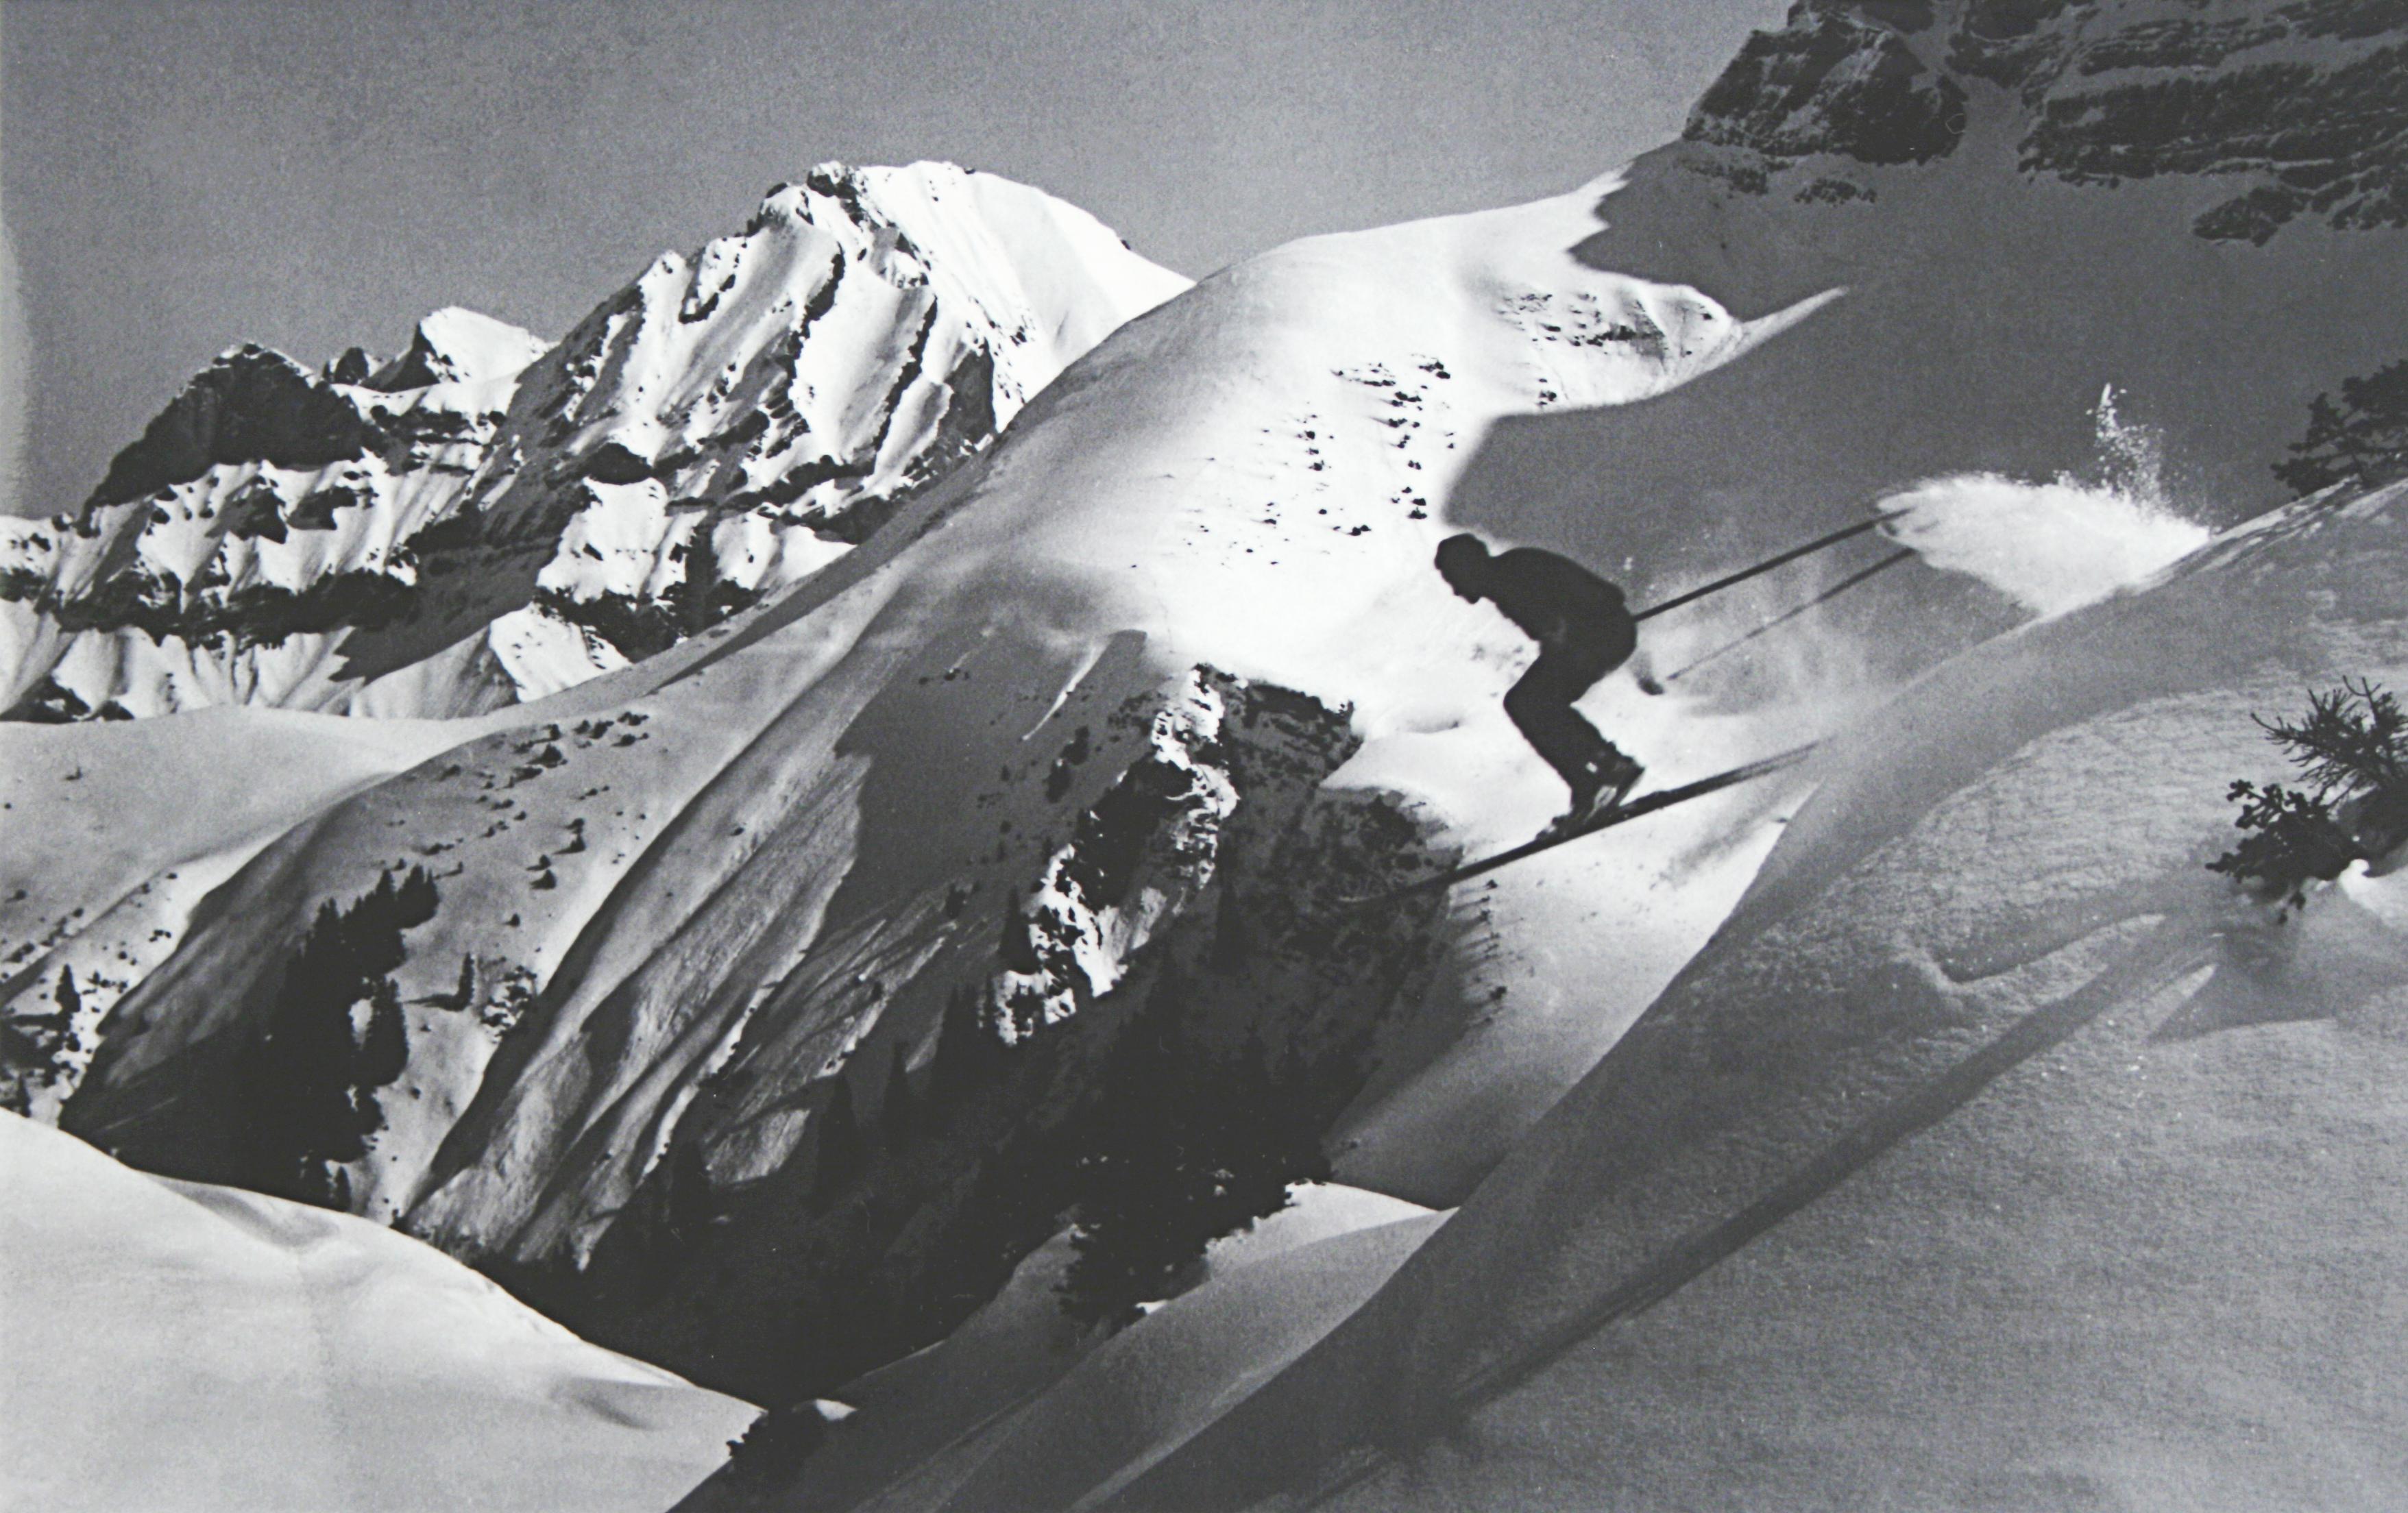 Vintage, Alpine Ski photograph.
'THE JUMP', a new mounted black and white photographic image after an original 1930s skiing photograph. Prior to being a recreational activity skiing was purely a means of travelling from A to B through the snow, it